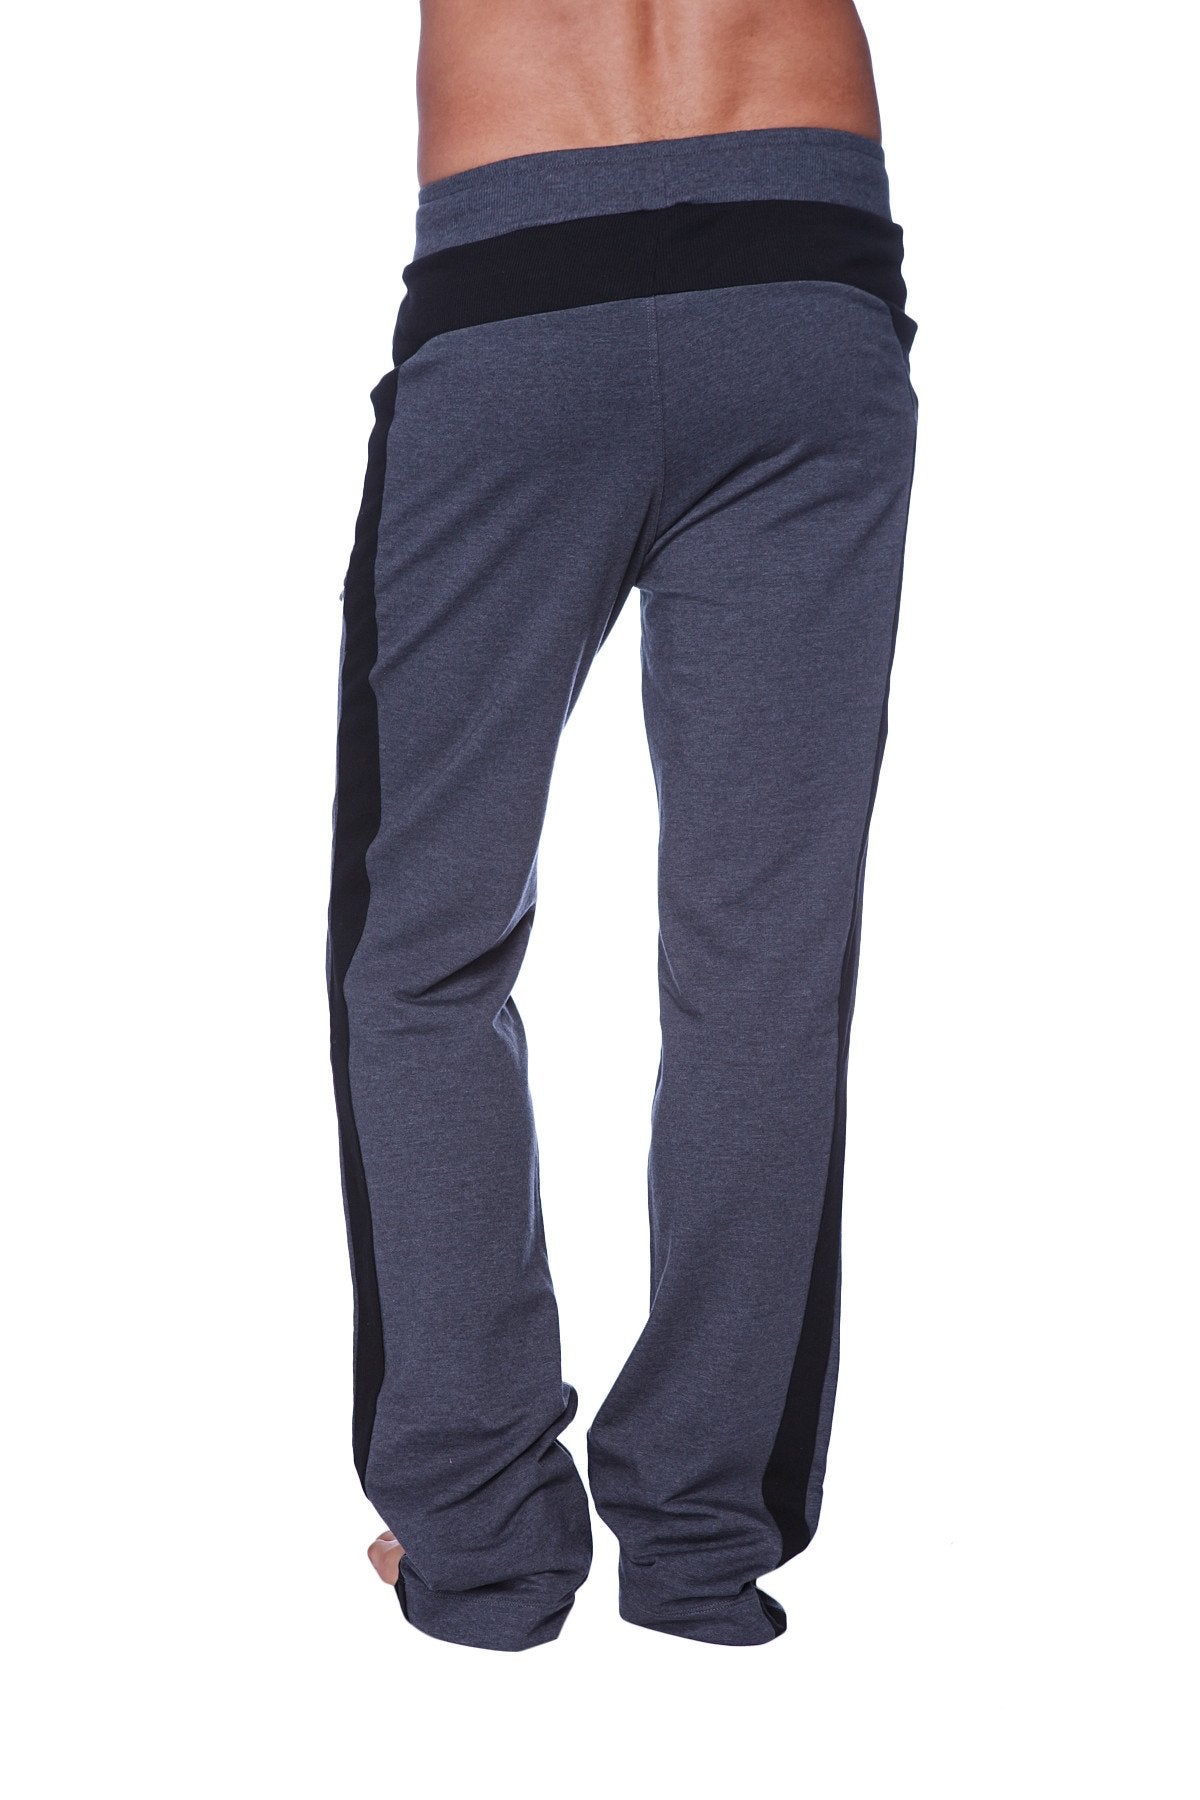 Eco-Track & Yoga Sweat Pant (Charcoal w/Black) by 4-rth